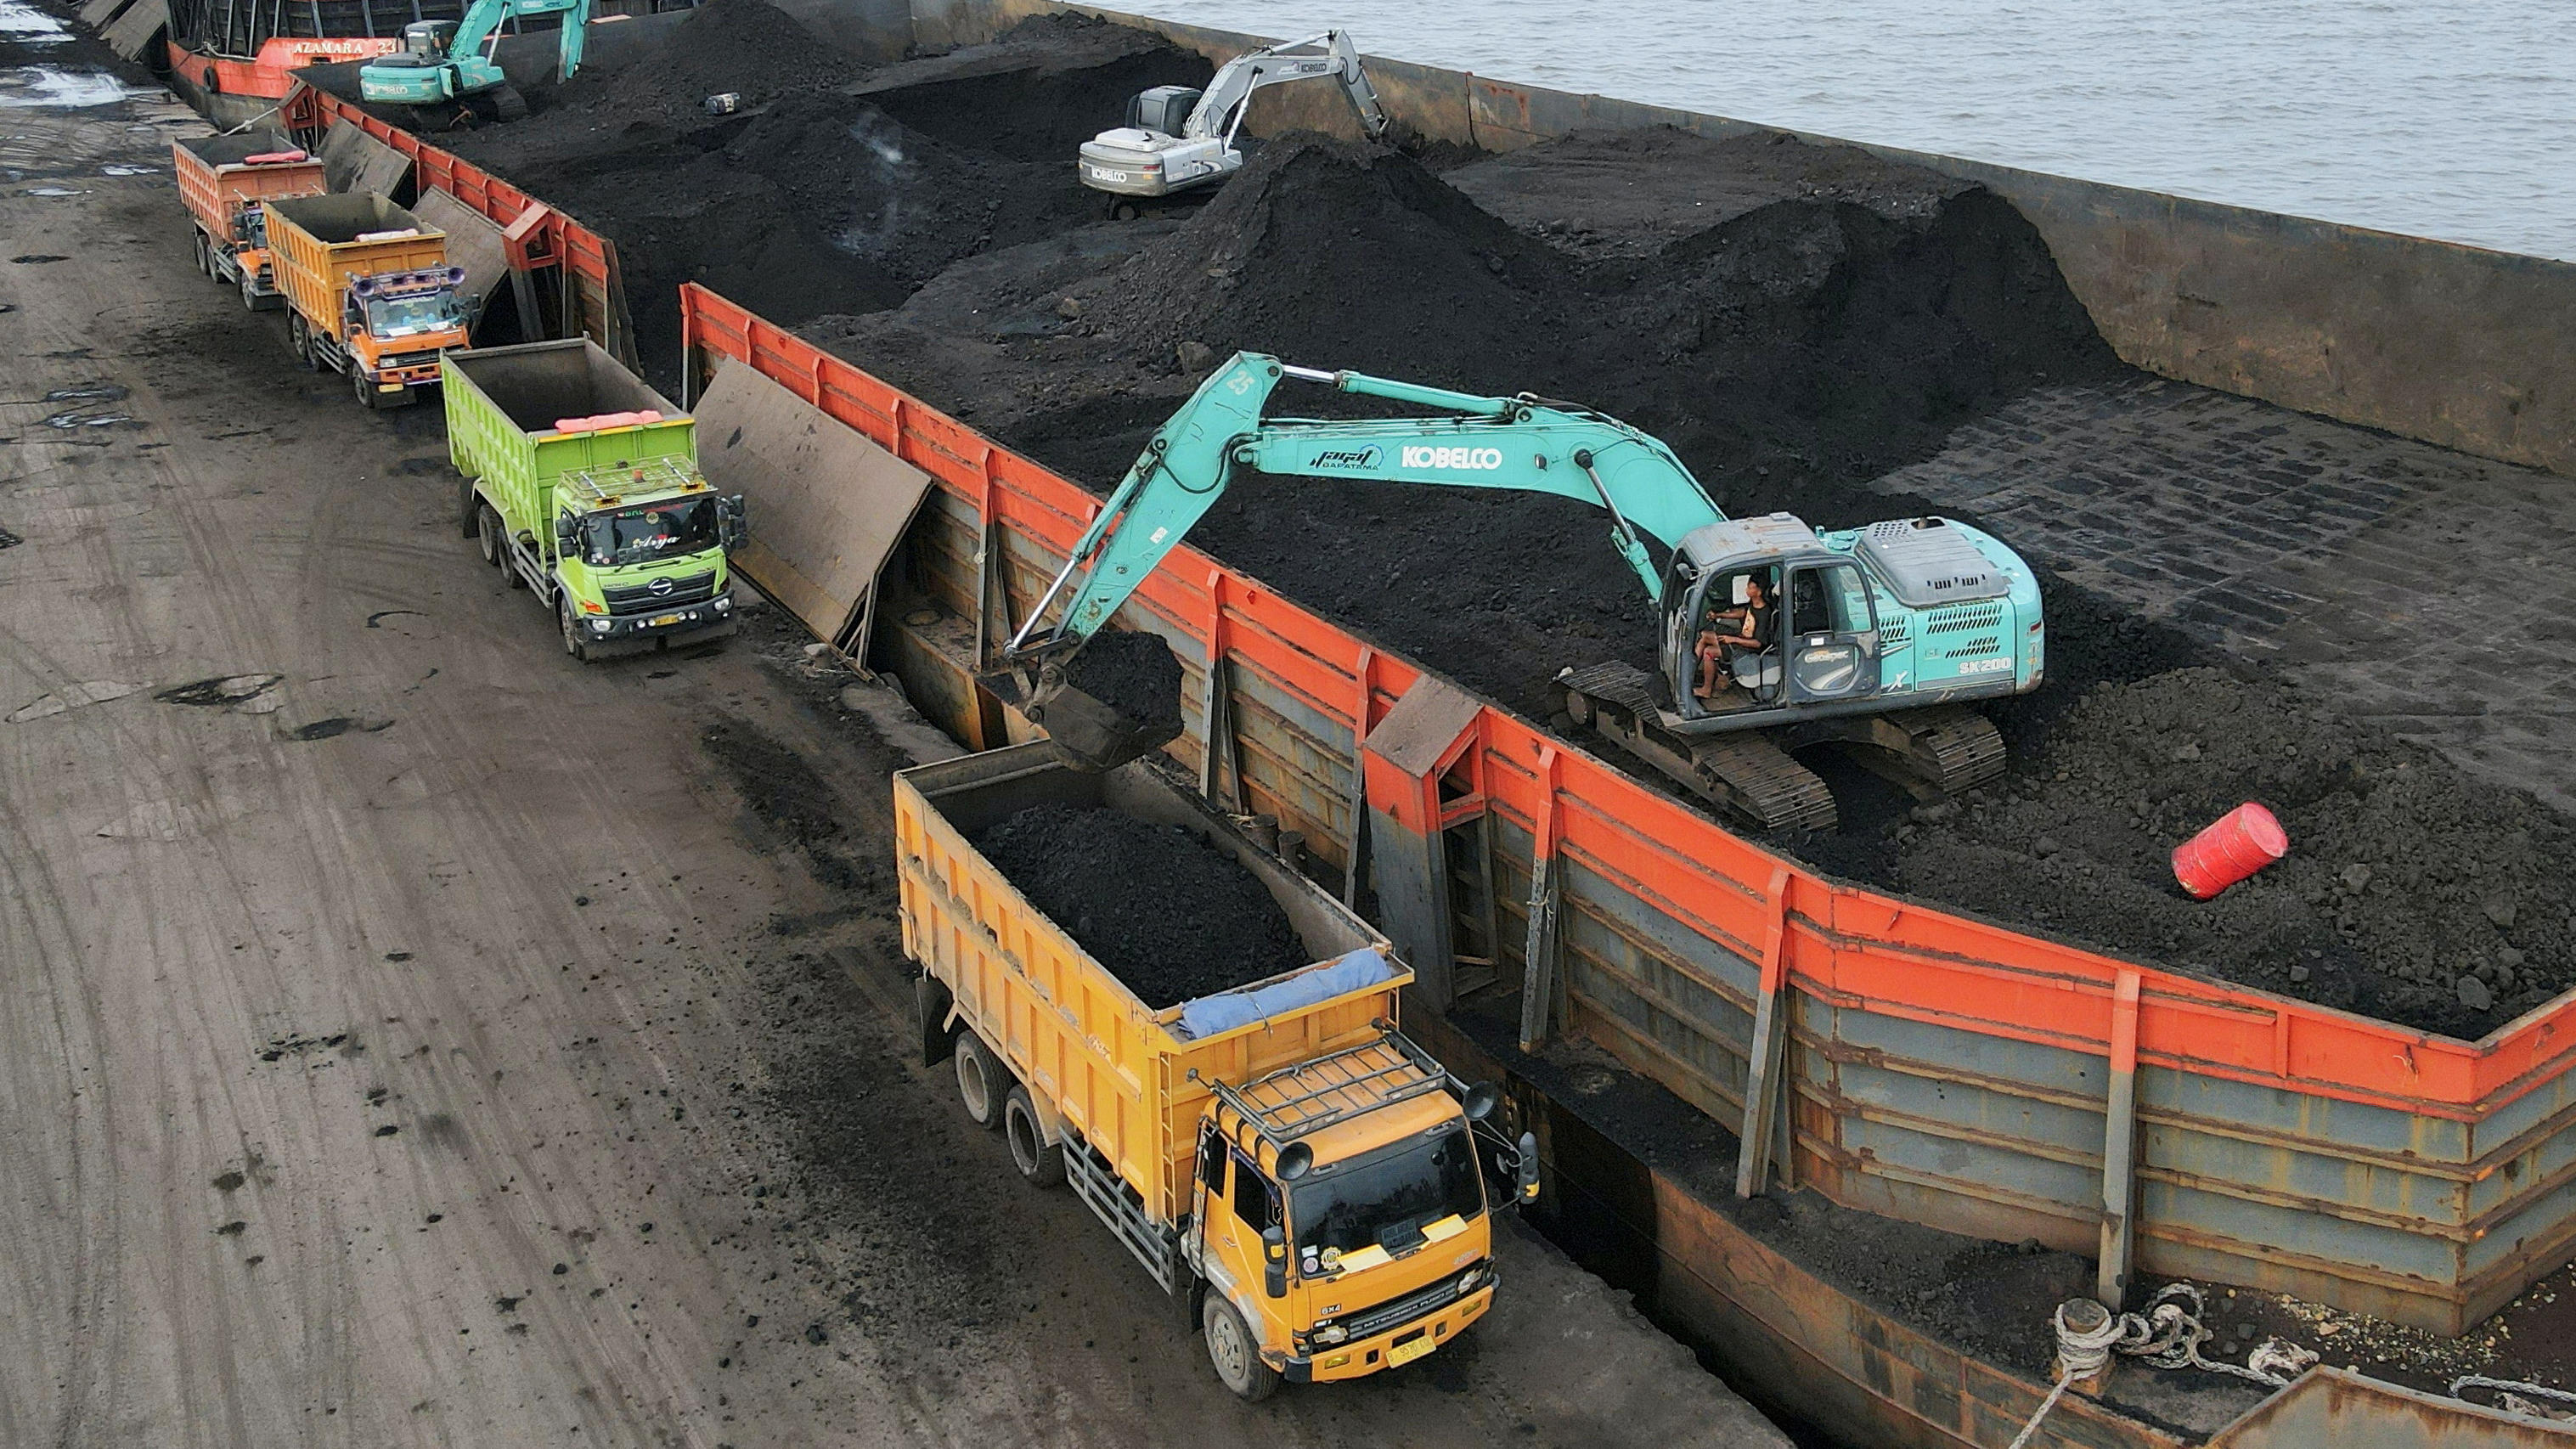 FILE PHOTO: A worker operates a heavy vehicle for unloading coal from the barge into a truck to be distributed, at the Karya Citra Nusantara port in North Jakarta, Indonesia, January 13, 2022. Picture taken with a drone, January 13, 2022. REUTERS/Wil